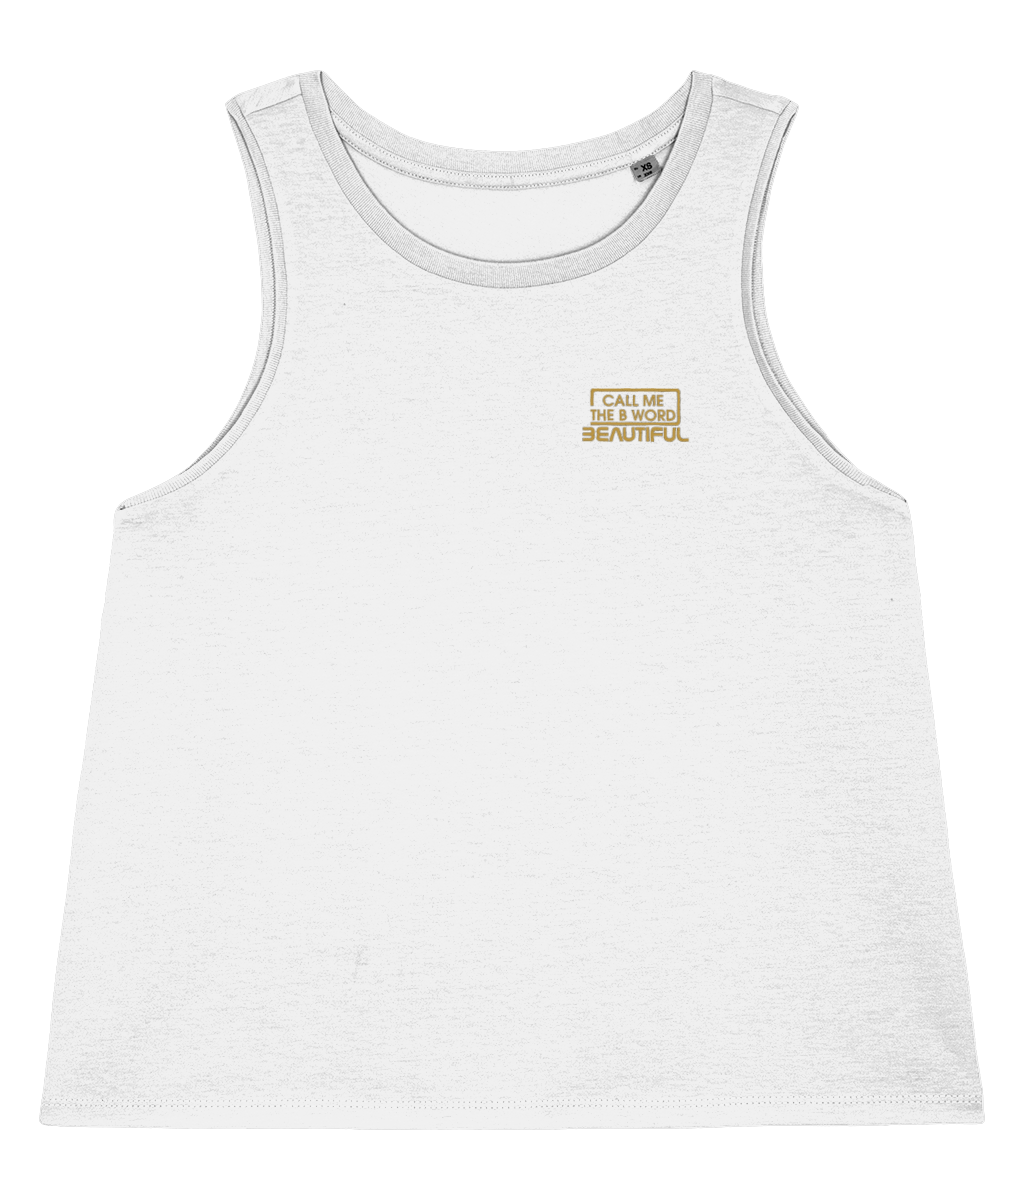 Call Me The B Word Beautiful, Women's, Organic Cotton, Crop Vest Top, Small Gold Left Chest Logo